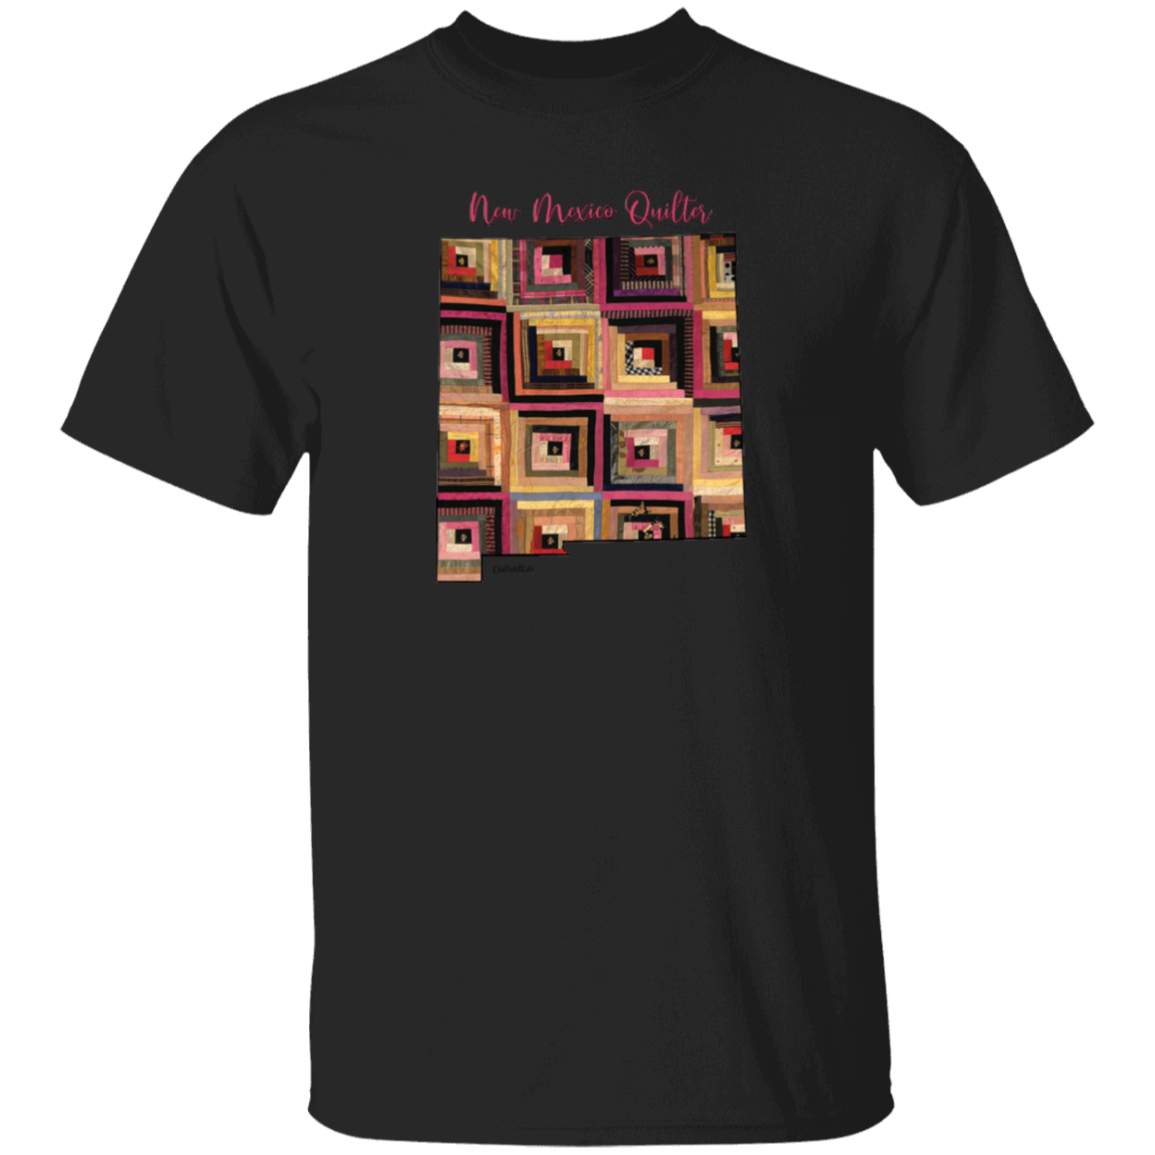 New Mexico Quilter T-Shirt, Gift for Quilting Friends and Family